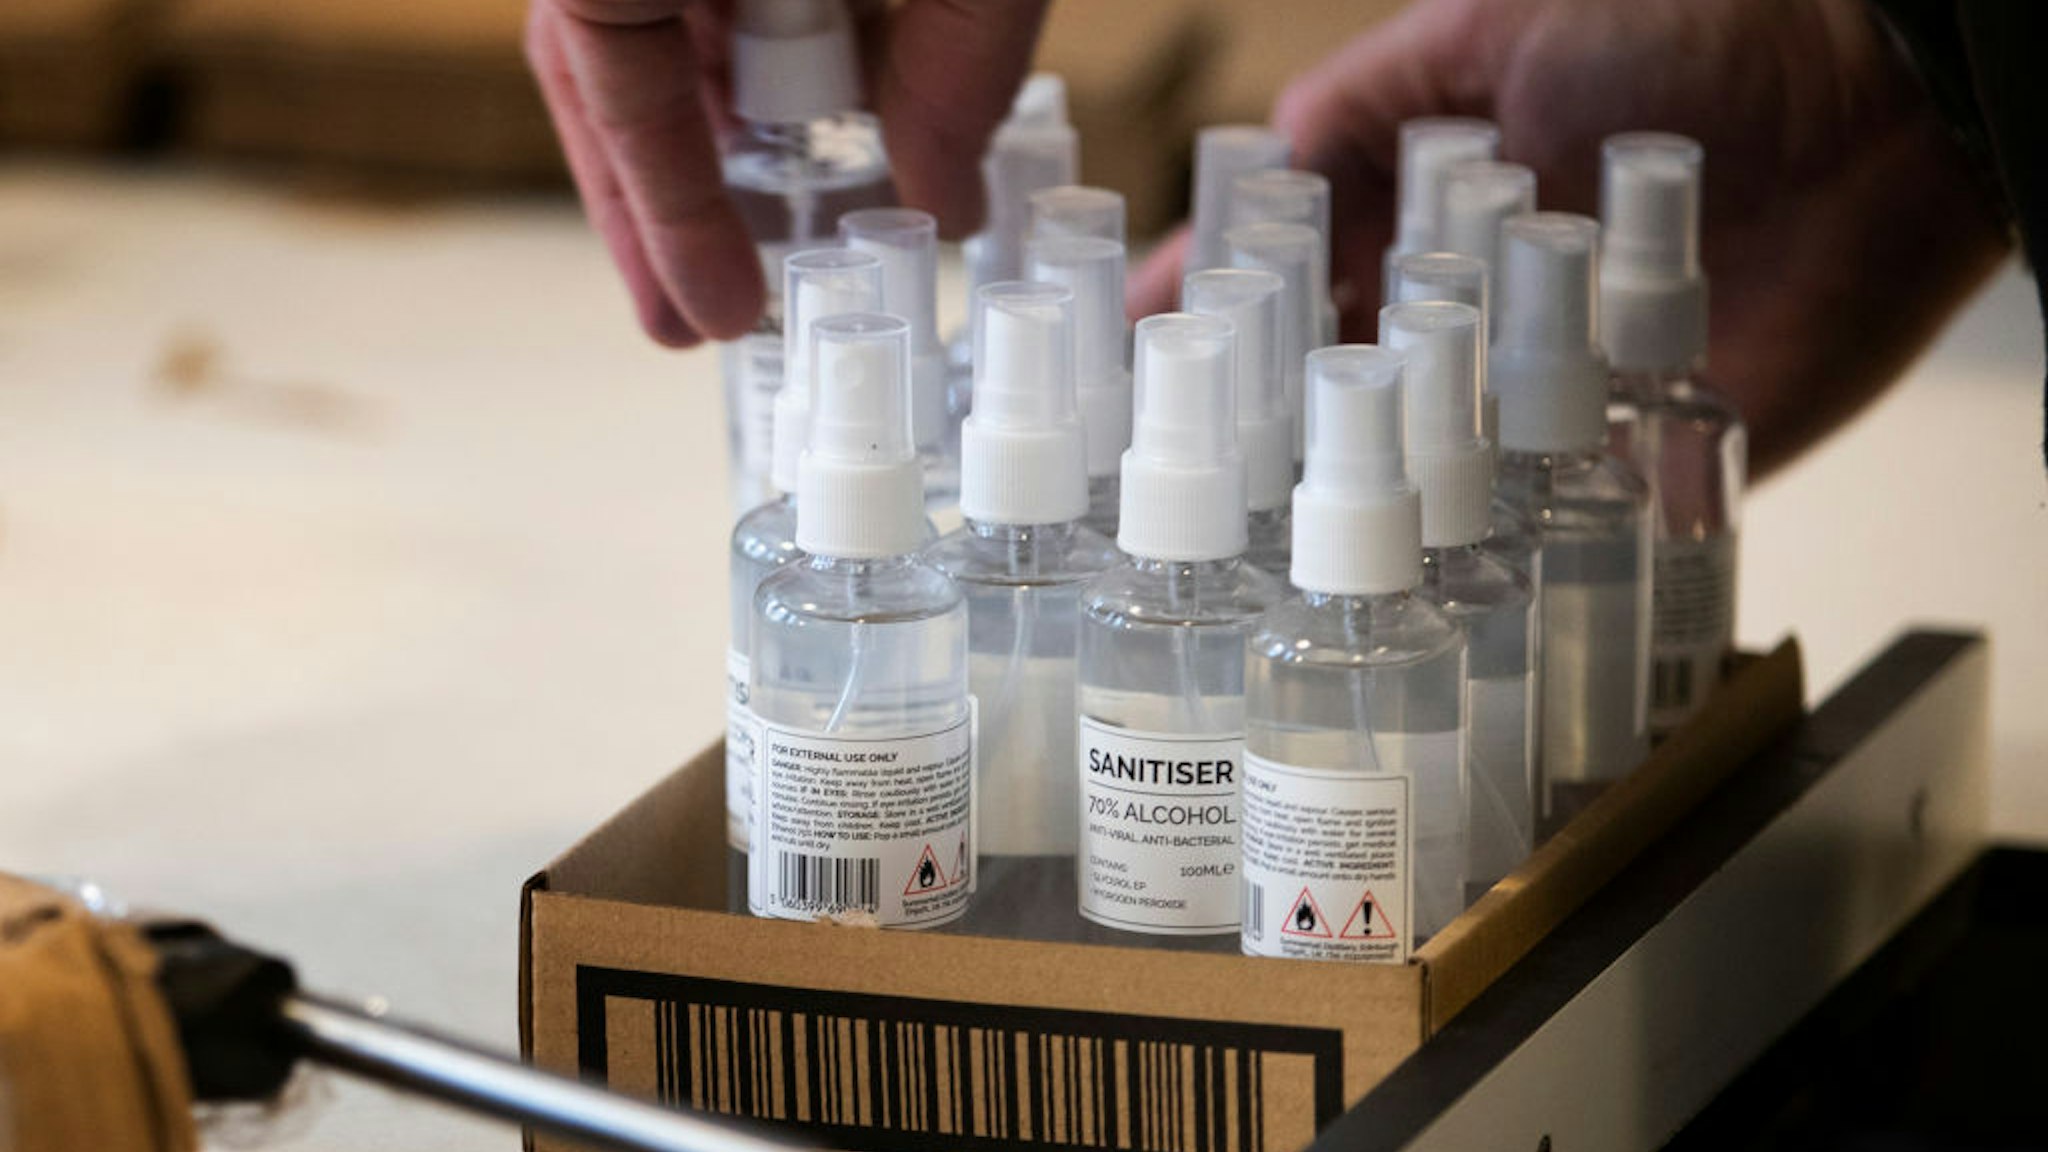 Hand sanitiser that has been produced inside Pickering's Gin distillery at Edinburgh's Summerhall which is a community of small businesses and creatives that have had to adapt and innovate during the coronavirus outbreak. (Photo by Jane Barlow/PA Images via Getty Images)